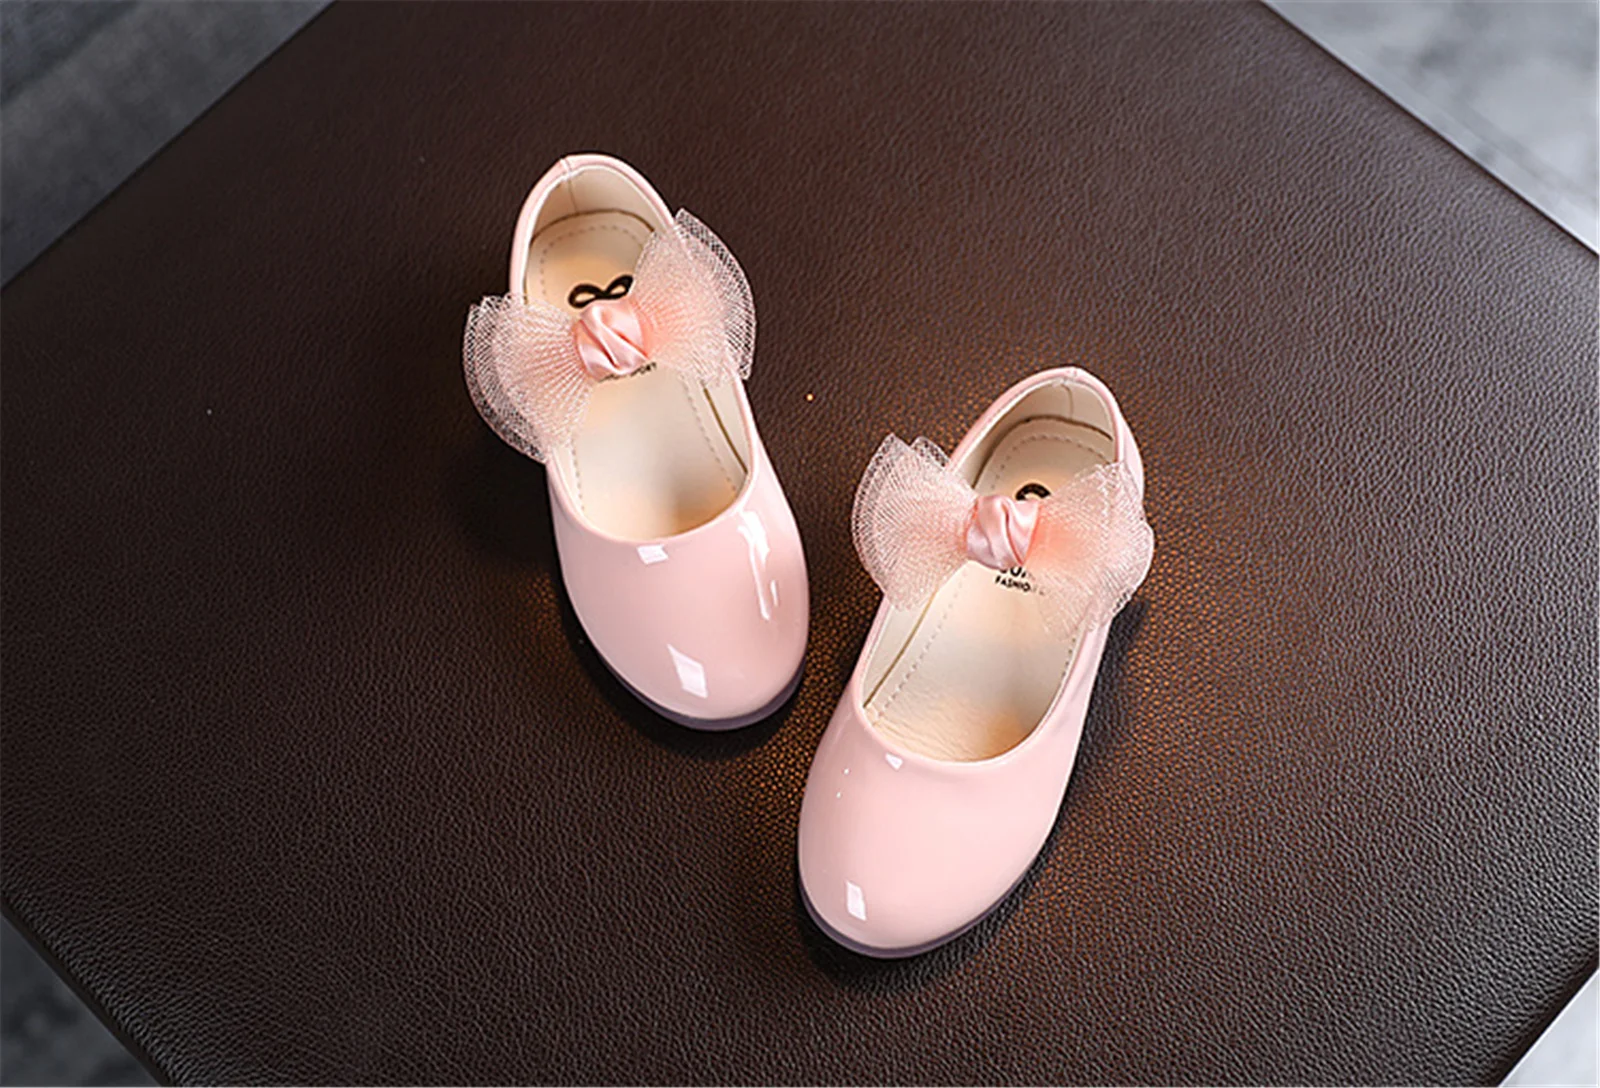 Children Girls Shoes Princess Ballet Flats Party Wedding Shoes Bowknot PU Leather Shoes Kids Summer Flats 1-6Y extra wide fit children's shoes